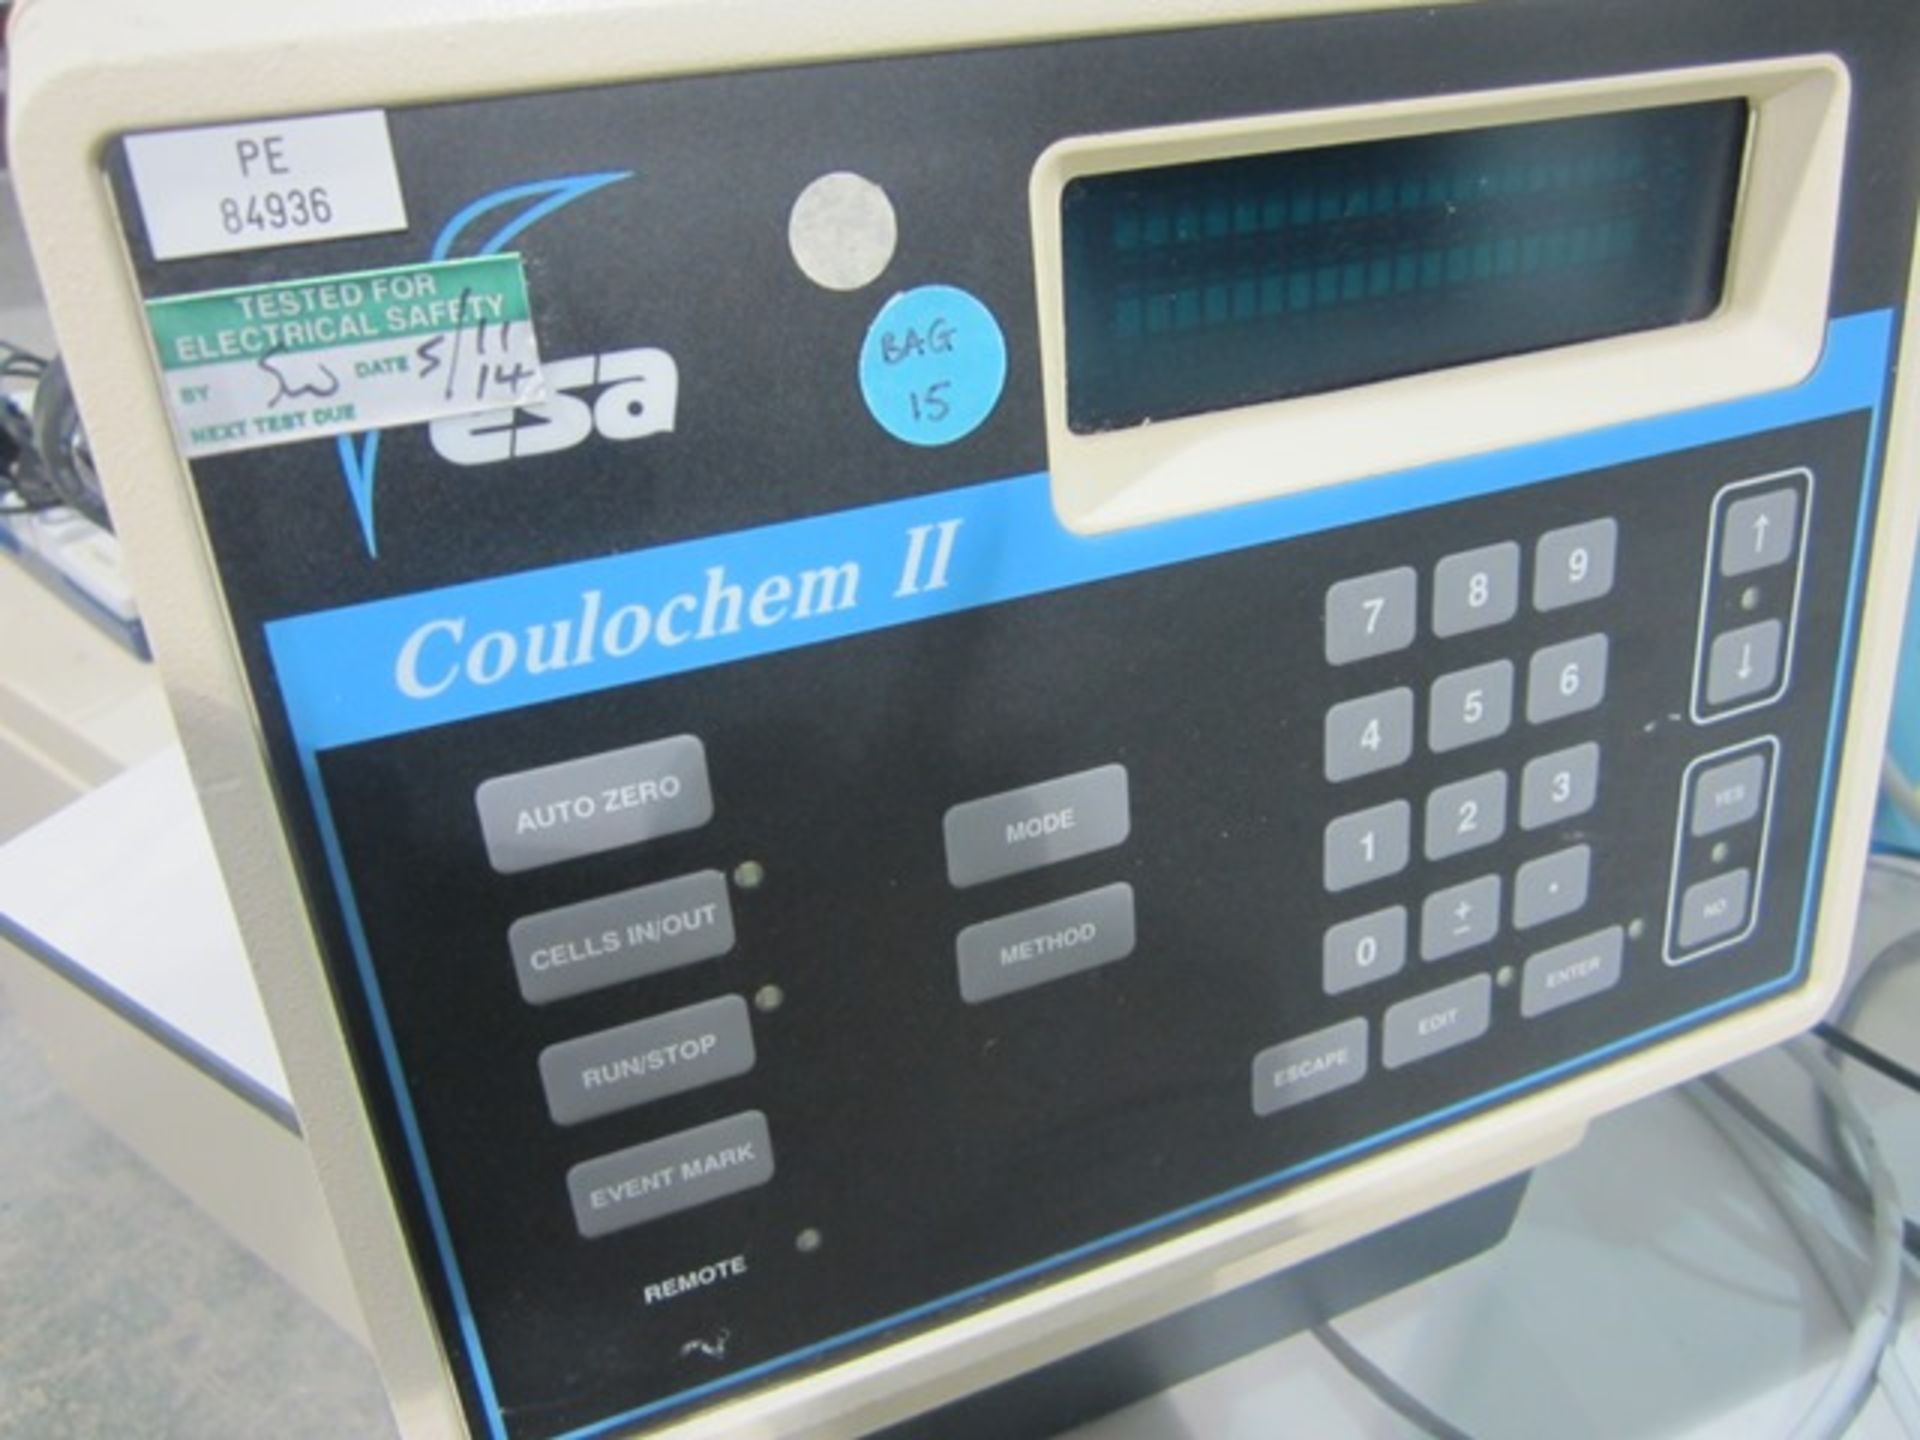 Coulochem ll ESA electrochemical detector, serial number 2178